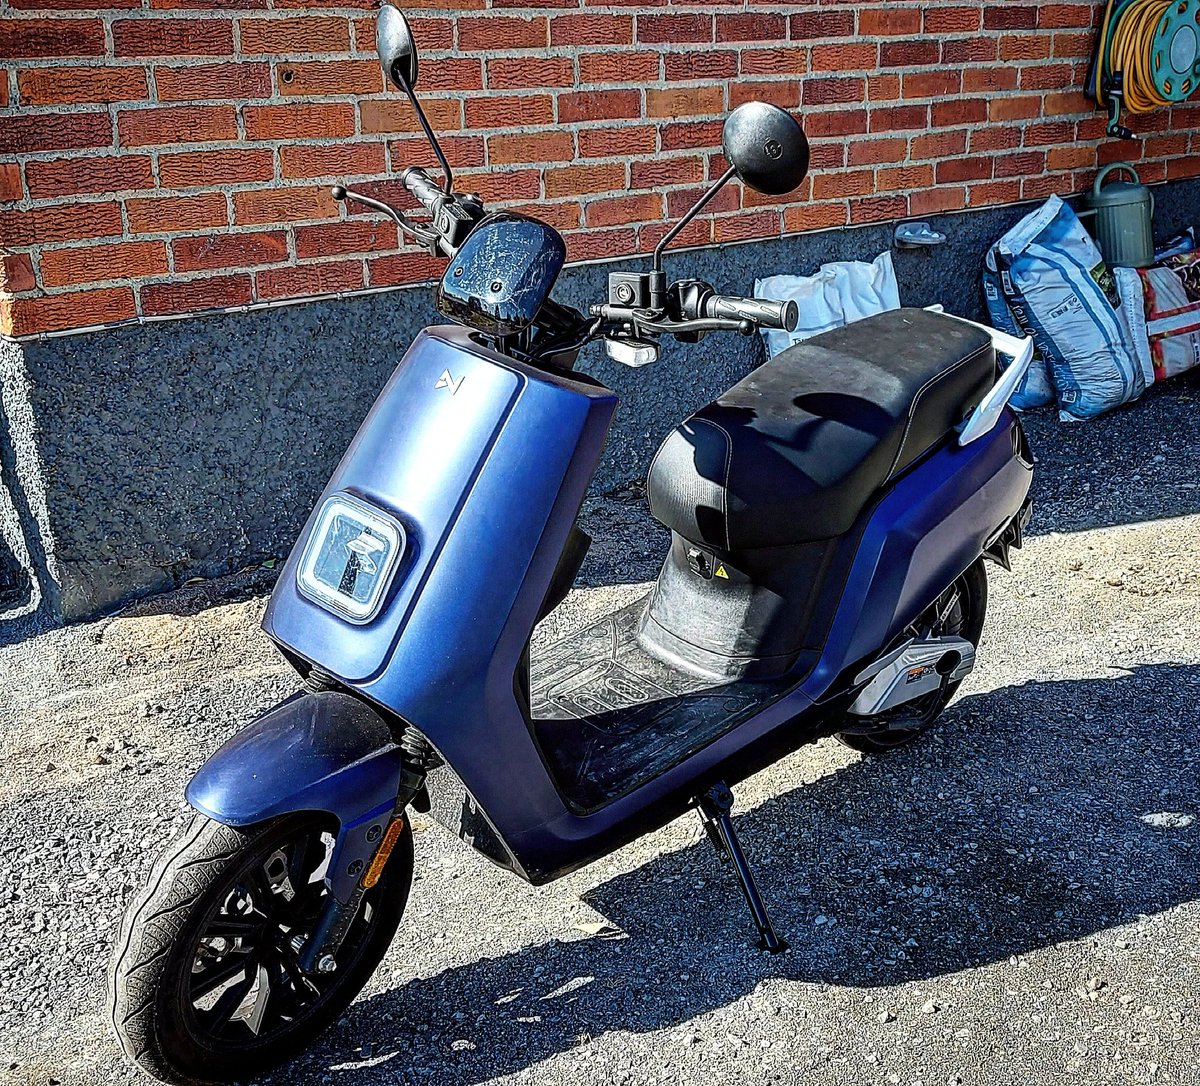 Today is a #beautifulday🌞 for a #scooterride 🛵💨 
#windy 🌬 , but still a beautiful, #sunnyday☀️ 

Now that the snow has melted, it was time to take out The Ol'Blue #electricscooter 

It's a bit #dusty in the pic, but I sorta cleaned it afterwards.